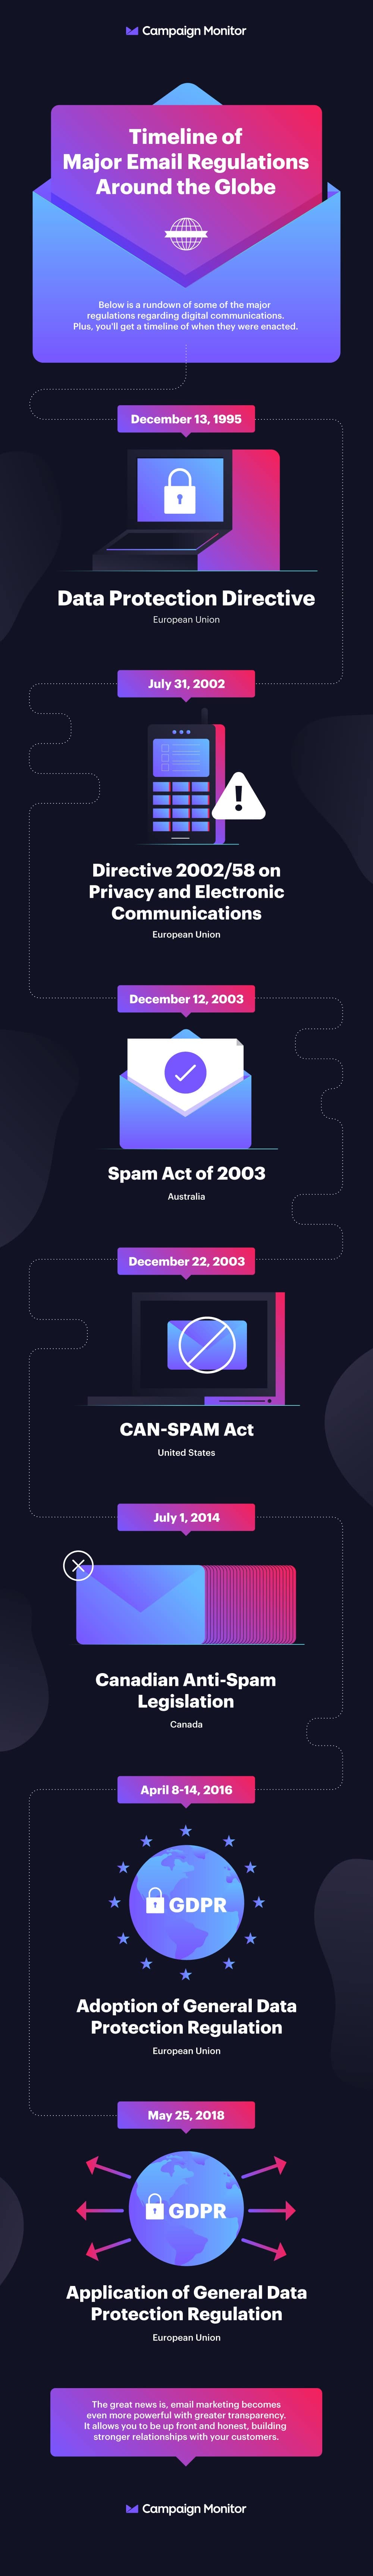 Timeline of Email Regulations infographic